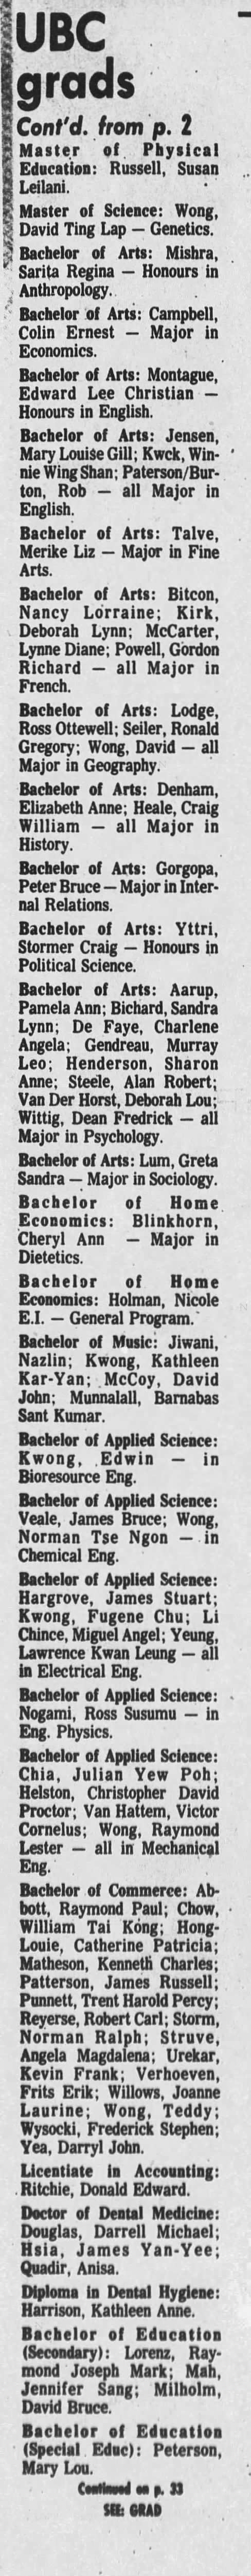 UBC grads. Richmond Review. 27 May 1981. P. 13